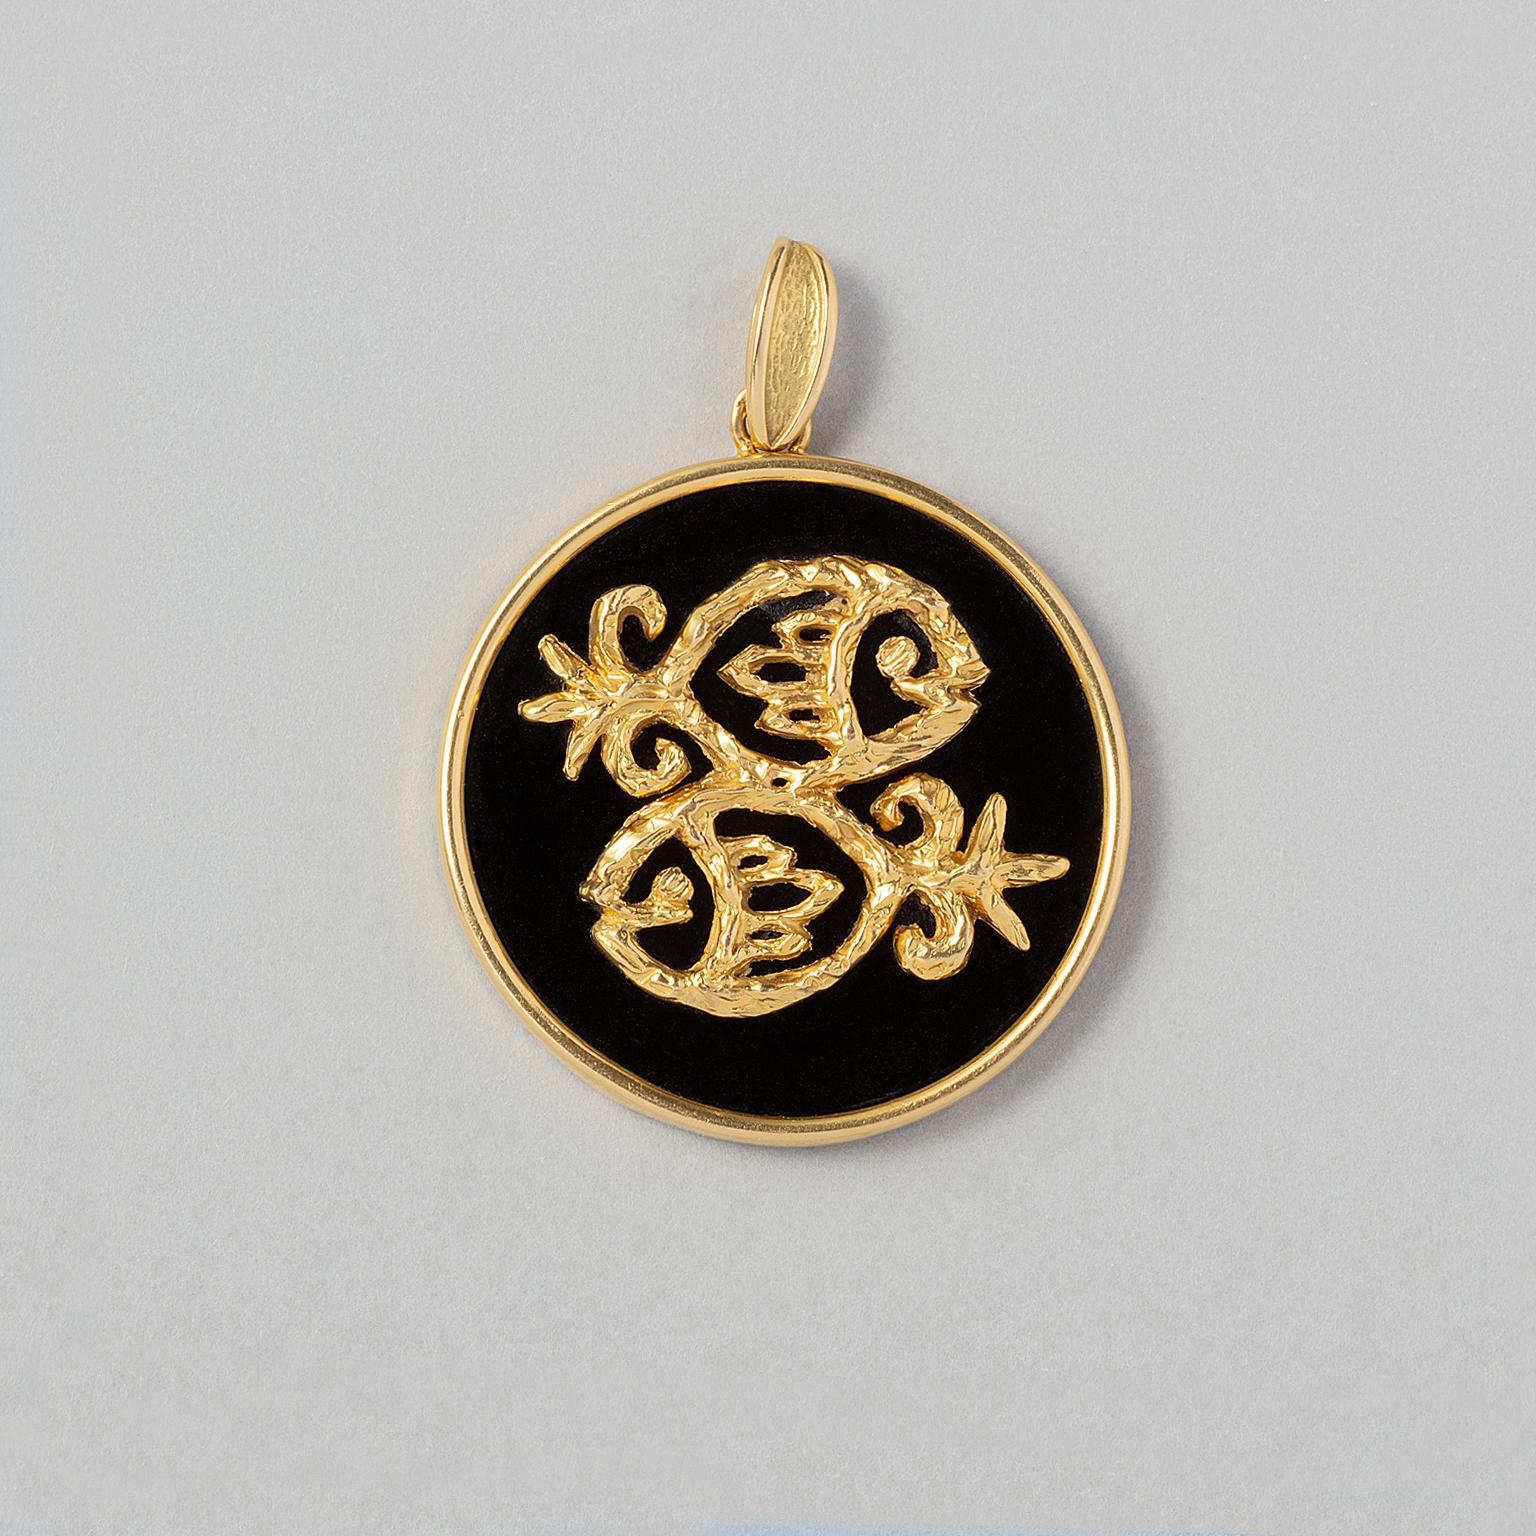 A round 18 carat yellow gold pendant set with an onyx plaque and a pisces zodiac made of textured gold. France, circa 1970.

weight: 15.04 gram
dimensions: 5 x 3.7 cm